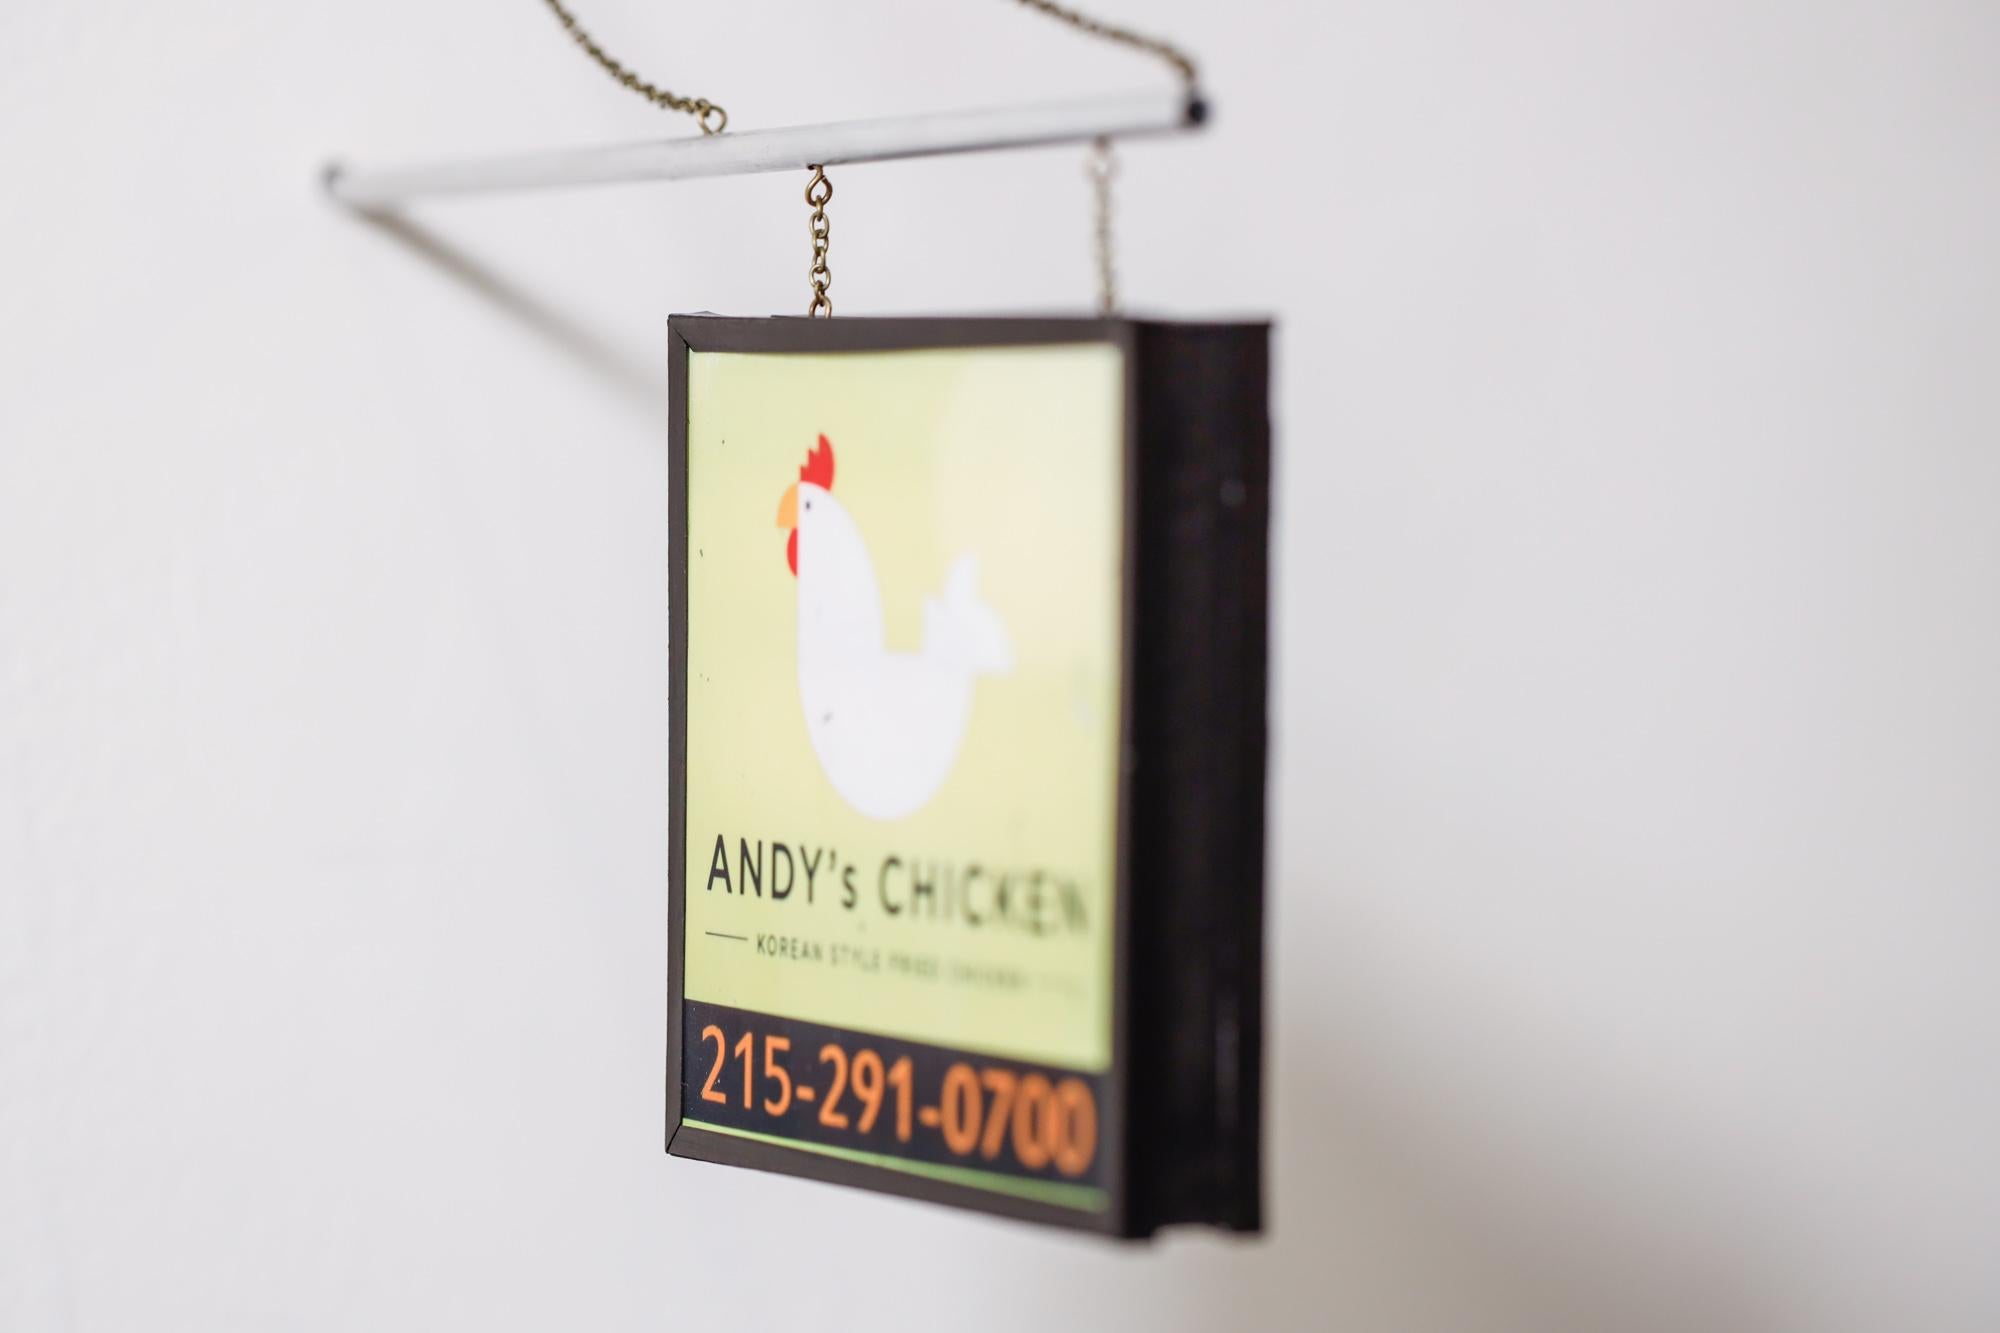 Andy's Chicken - Contemporary Sculpture by Drew Leshko